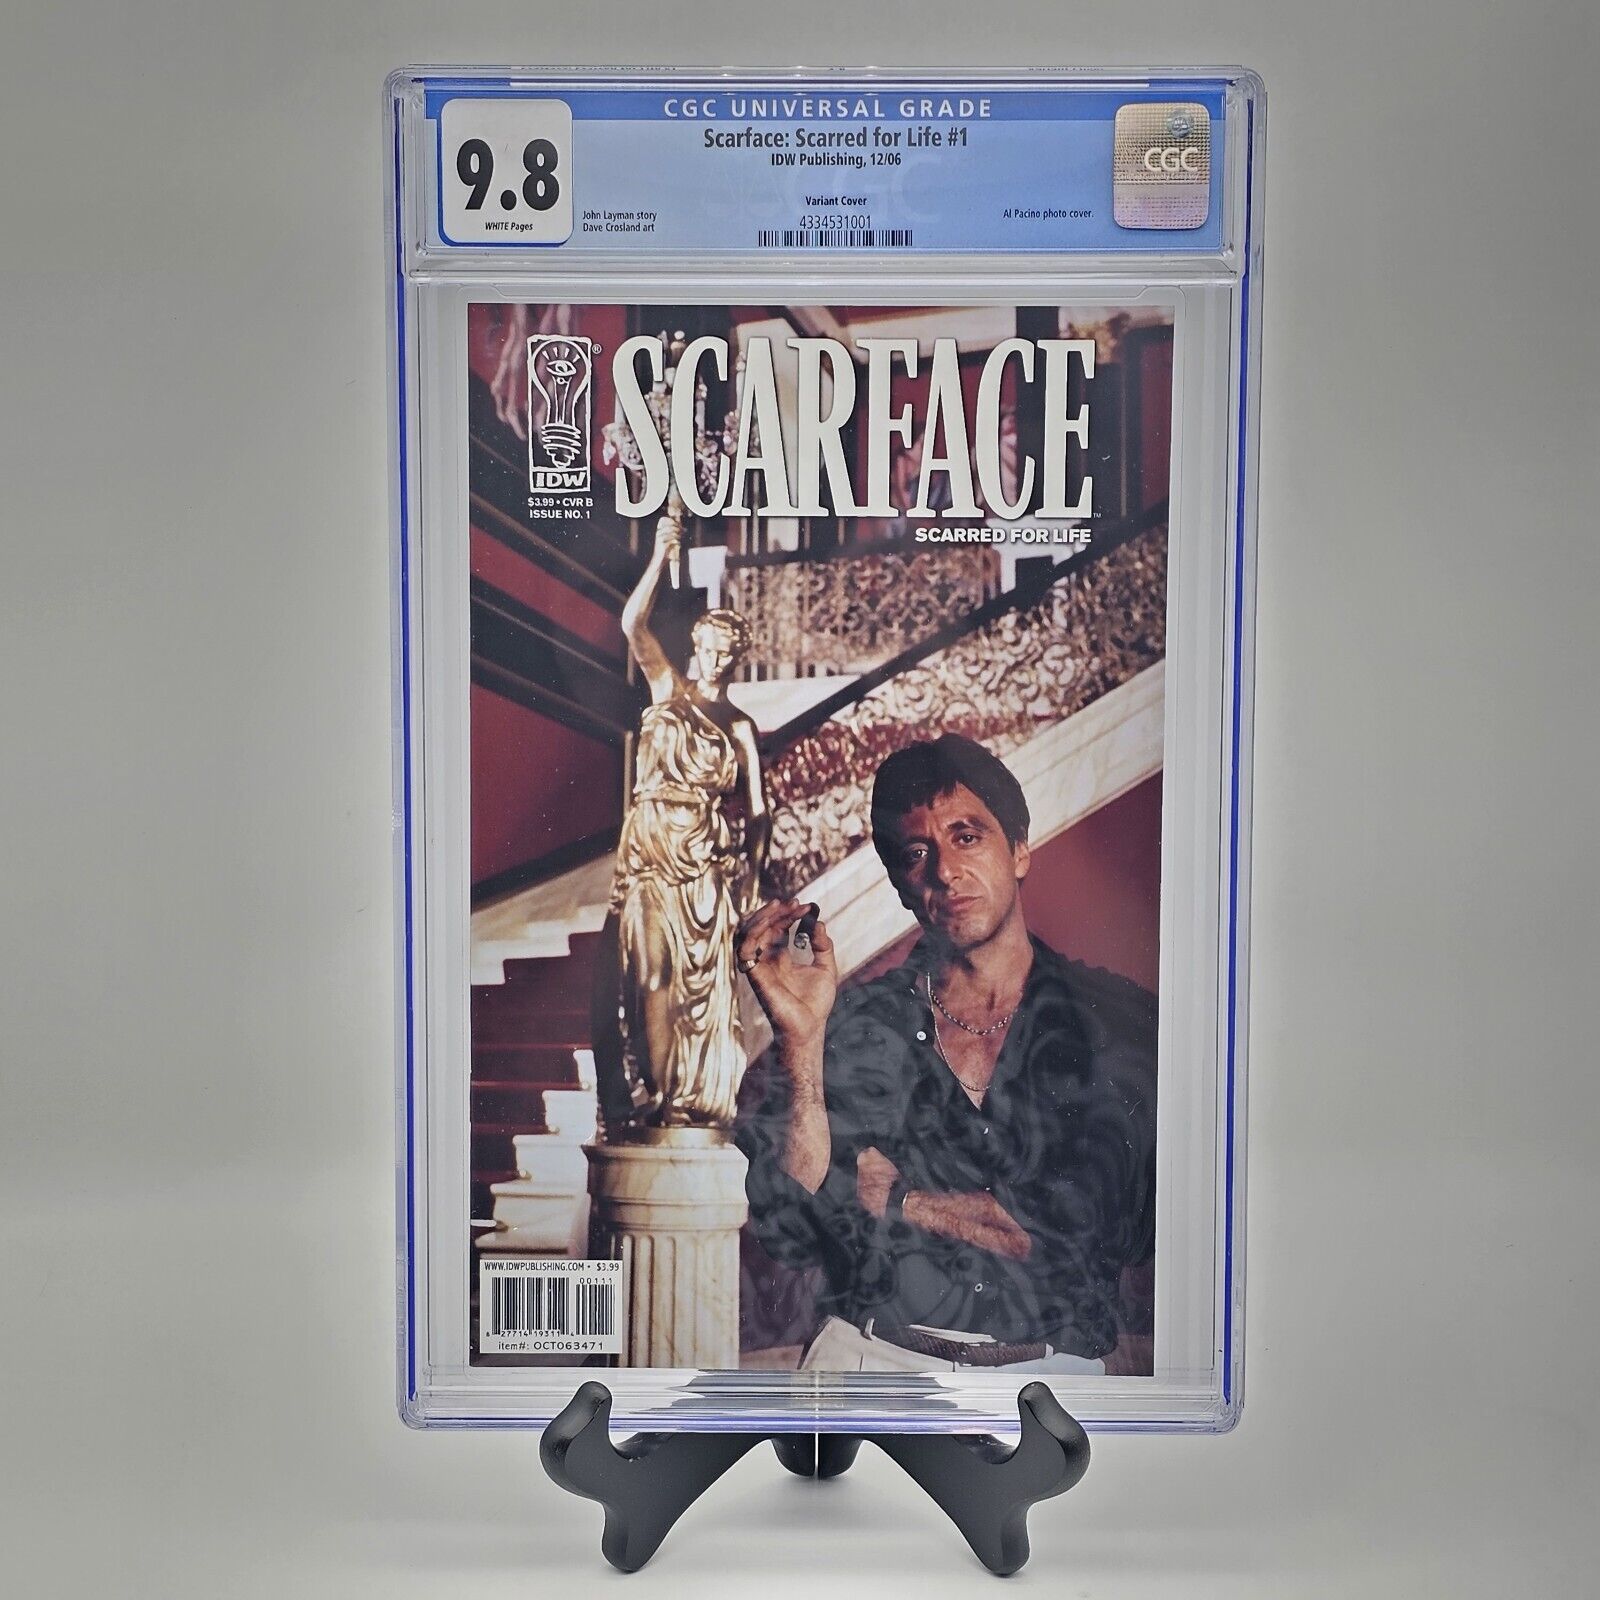 Scarface: Scarred for Life #1 CGC 9.8 New Slab - Photo cover John Layman Story